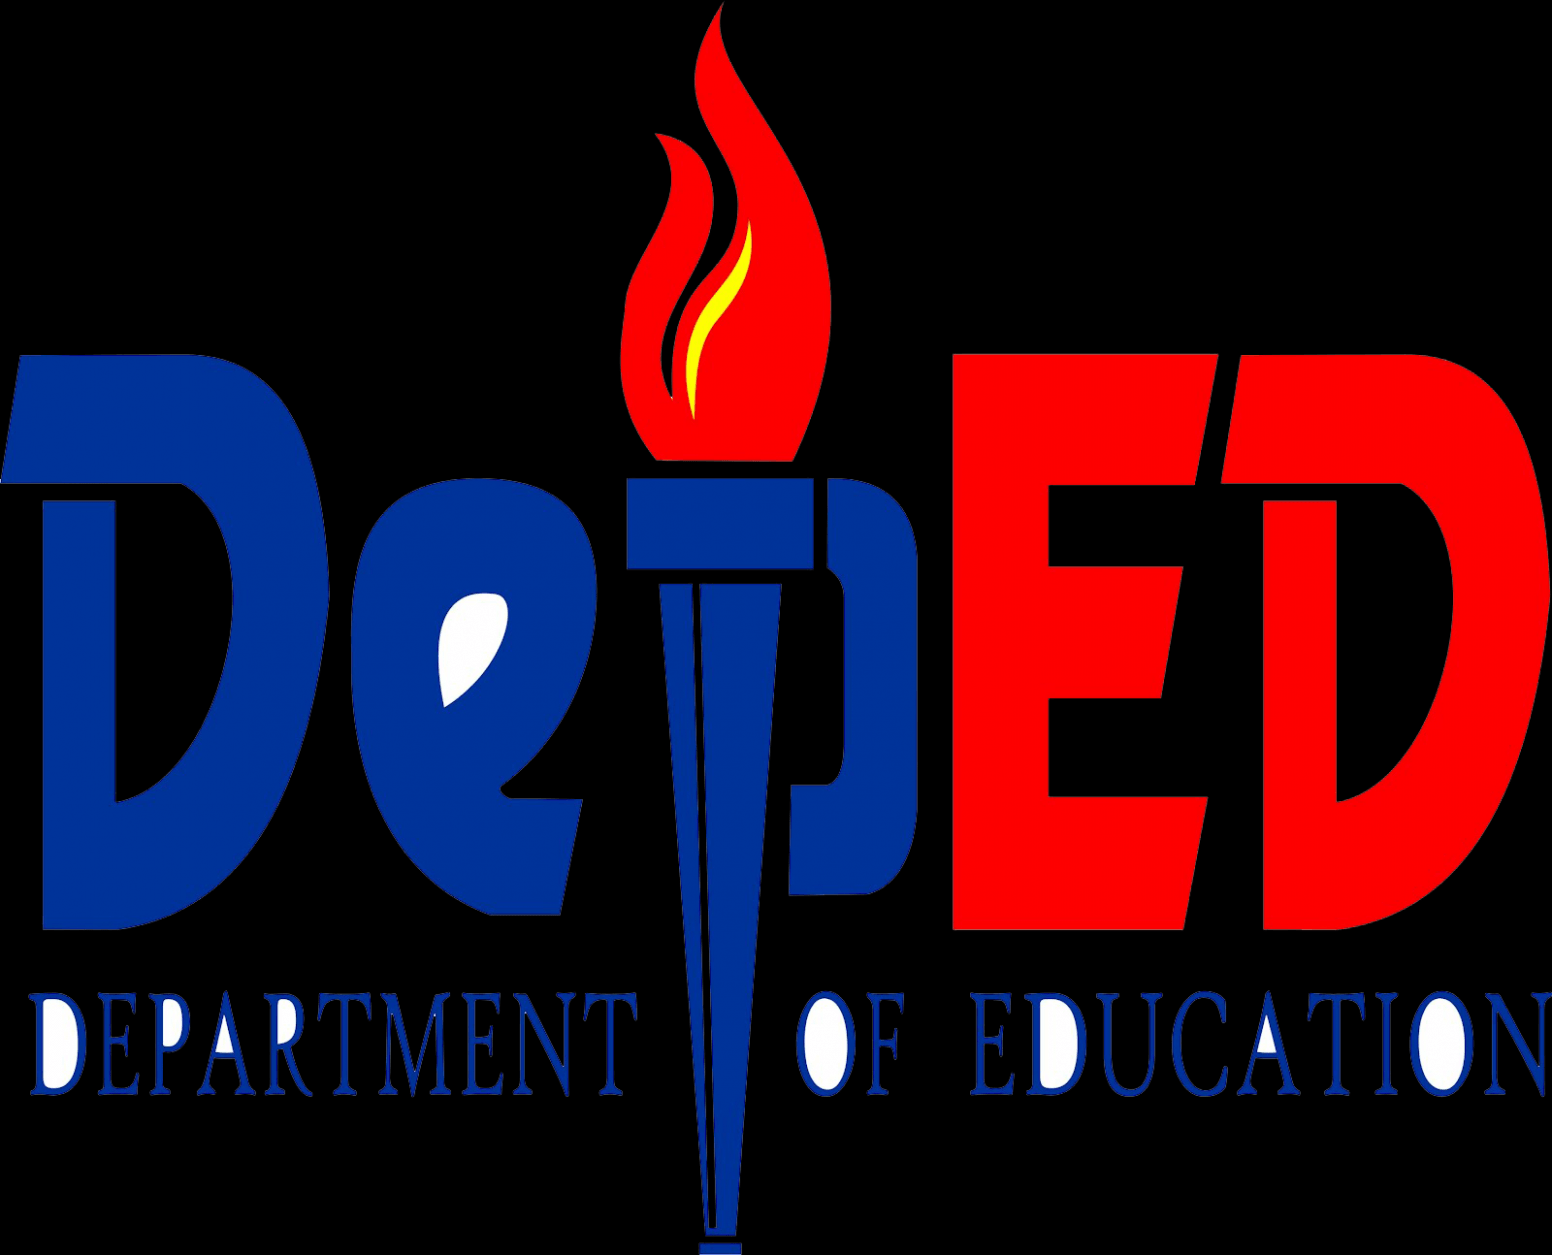 DepEd Logo - 3 Unconventional Knowledge About Www.deped Logo That You